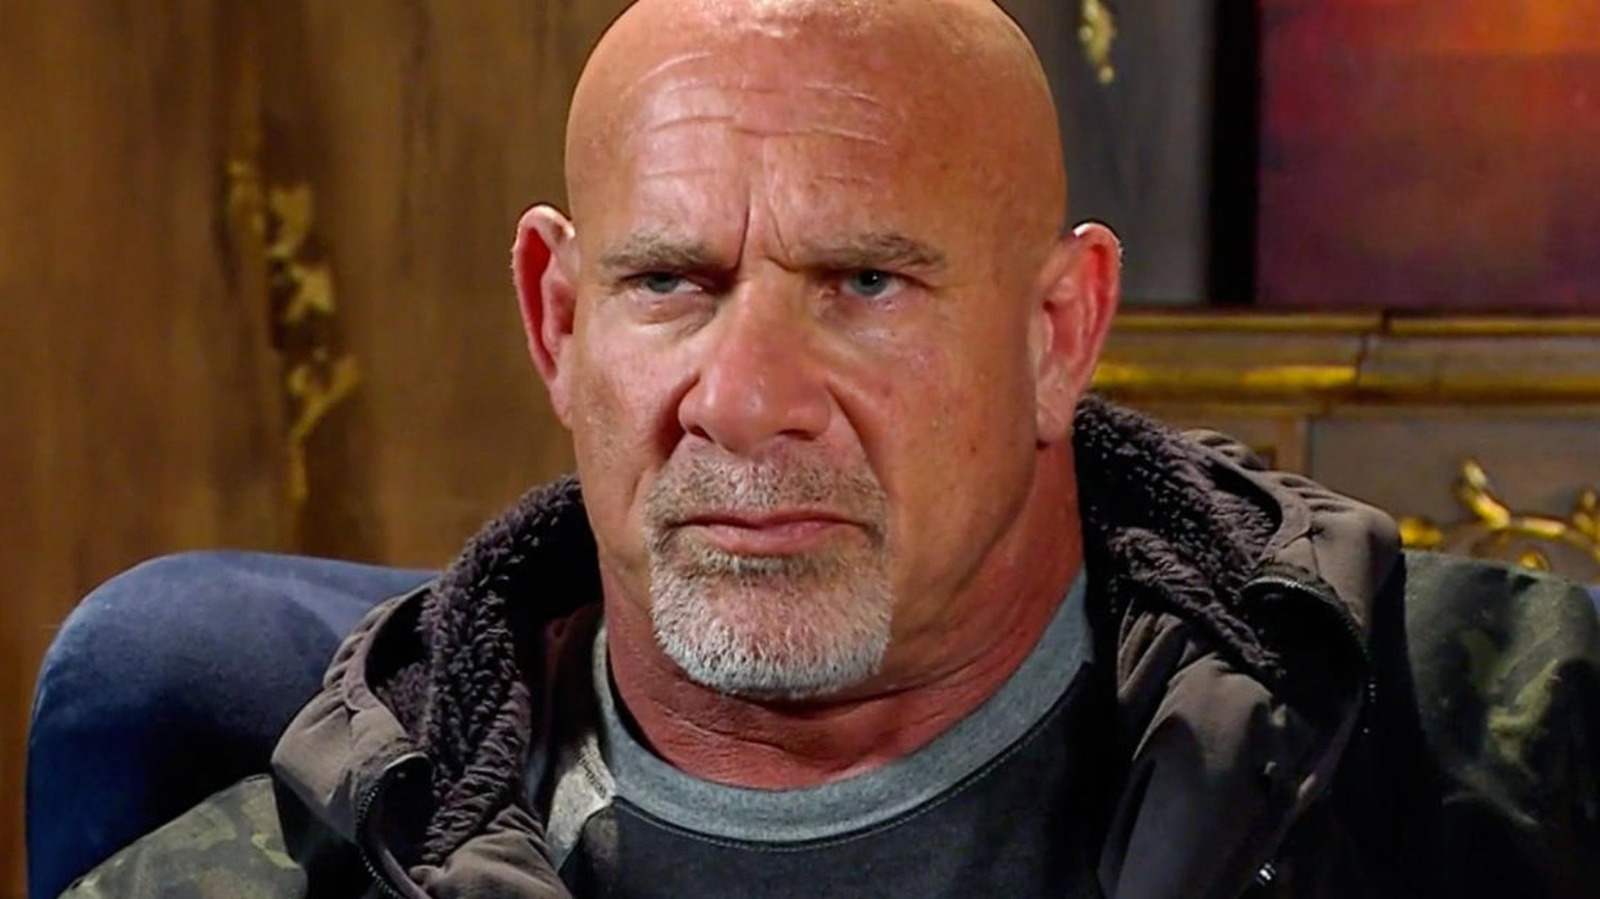 WWE HOFer Goldberg Says Vince McMahon Never Gave Him The Retirement Match He Expected